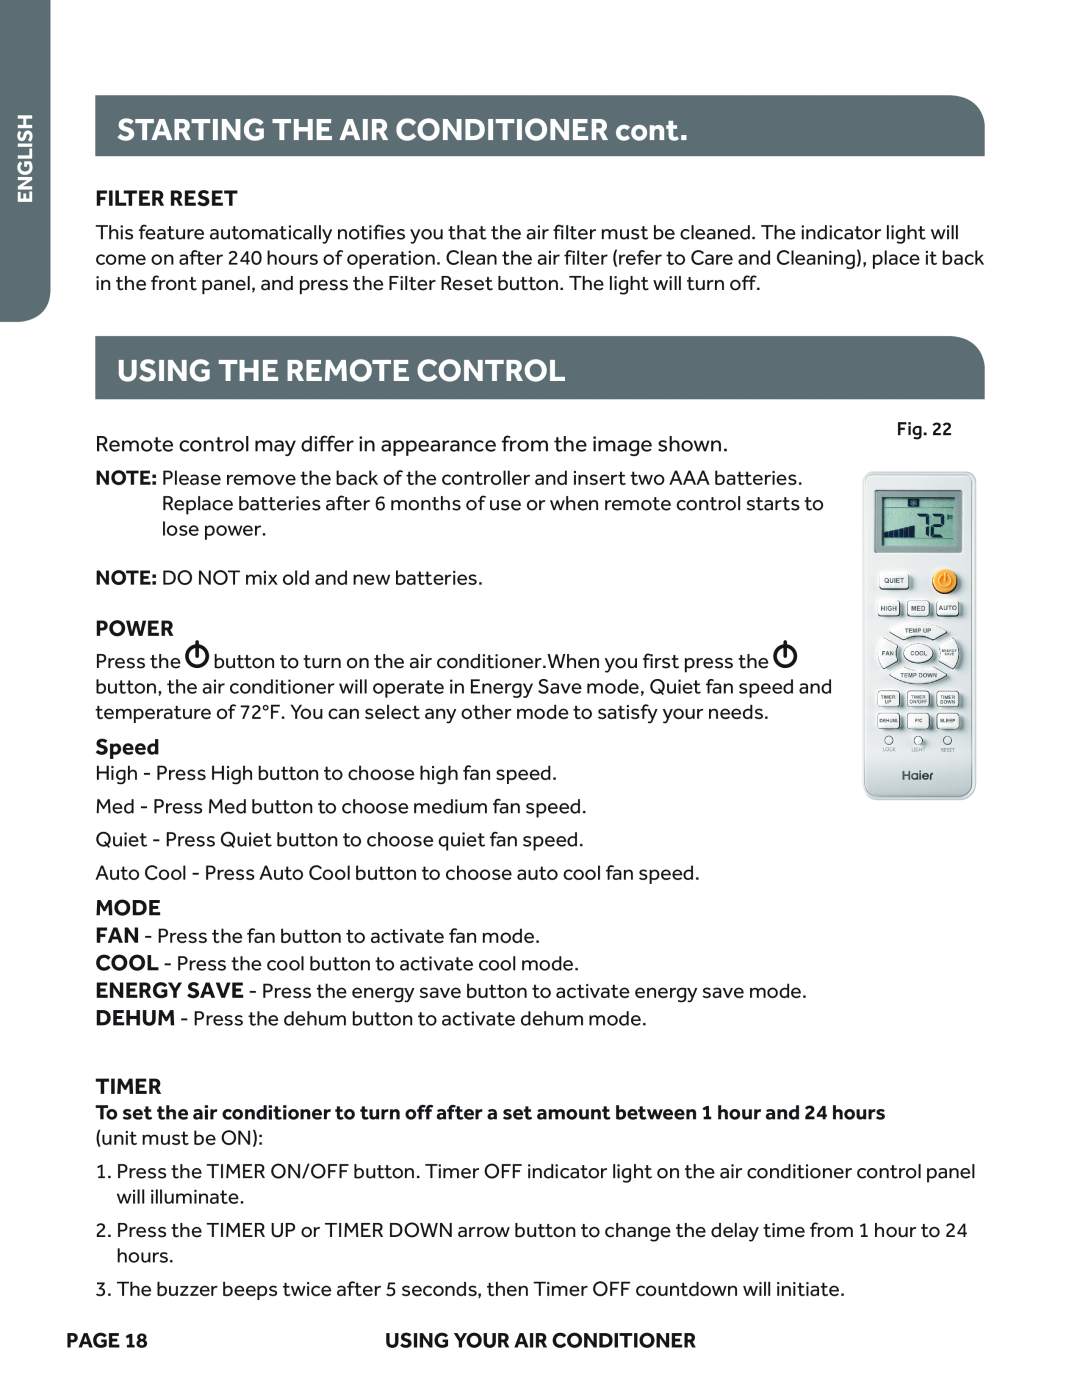 Haier ESAQ408P Using The Remote Control, STARTING THE AIR CONDITIONER cont, Filter Reset, Power, Speed, Mode, Timer, Page 